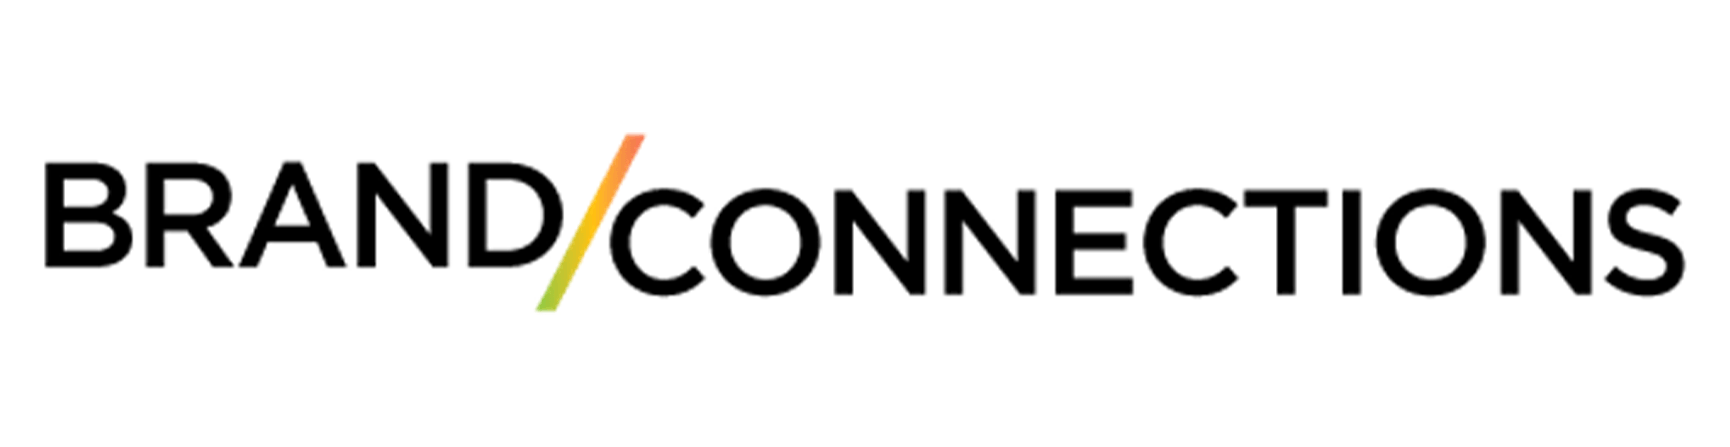 Brand Connections logo